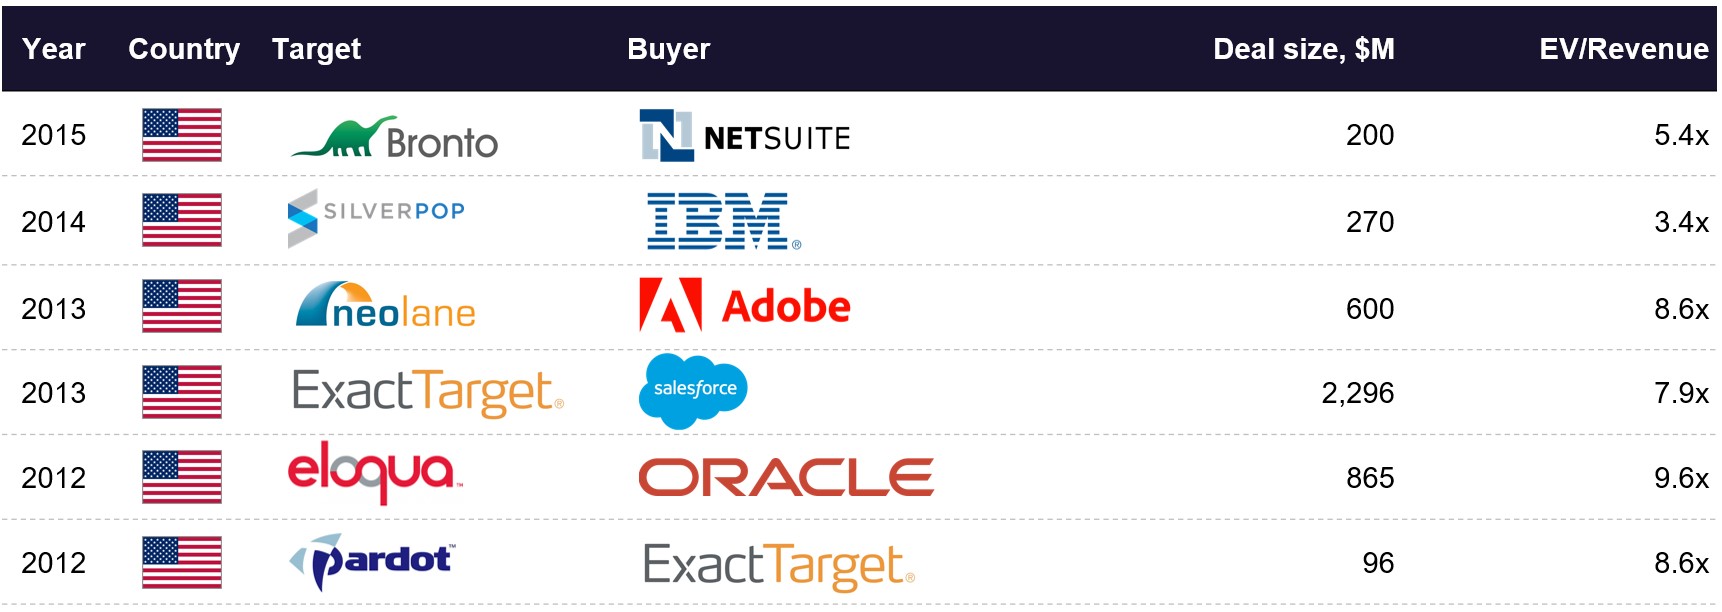 Email marketing acquisitions: NetSuite, IBM, Adobe, Salesforce, Oracle, ExactTarget